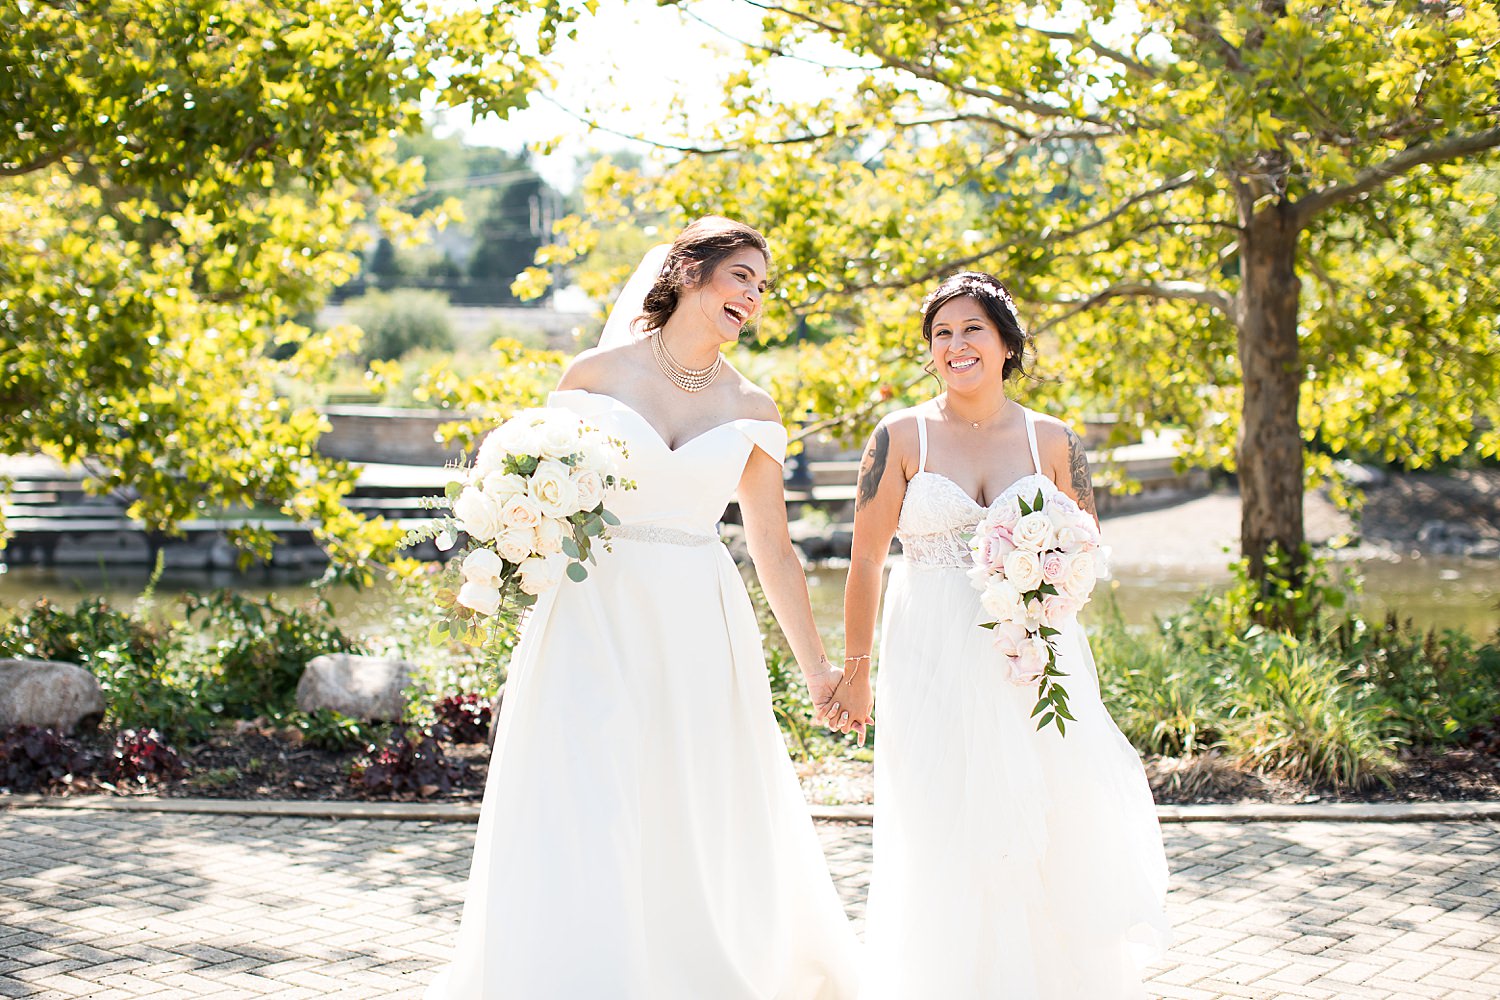 Brides walking in park with bouquets.